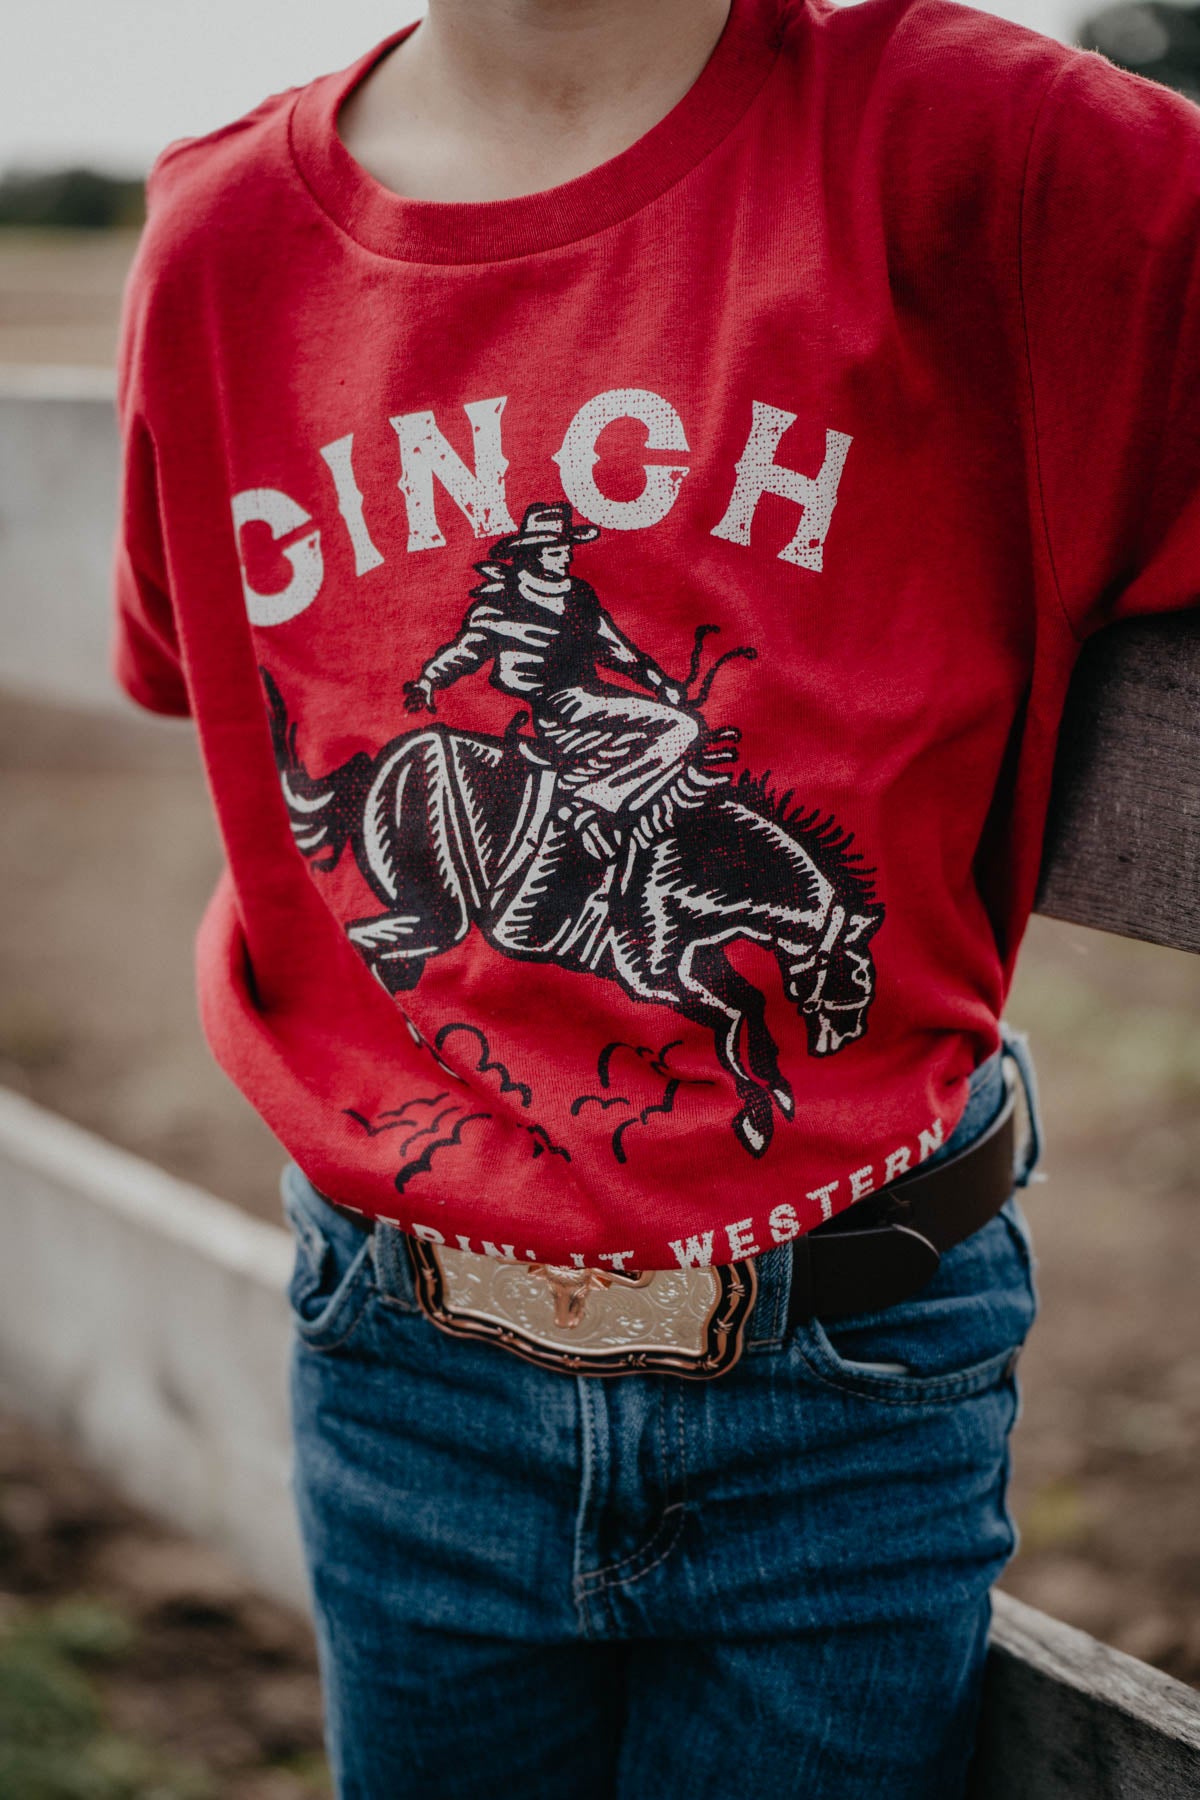 Youth 'Keepin' it Western' Red CINCH T-shirt (2T-4T, Youth S-XL)